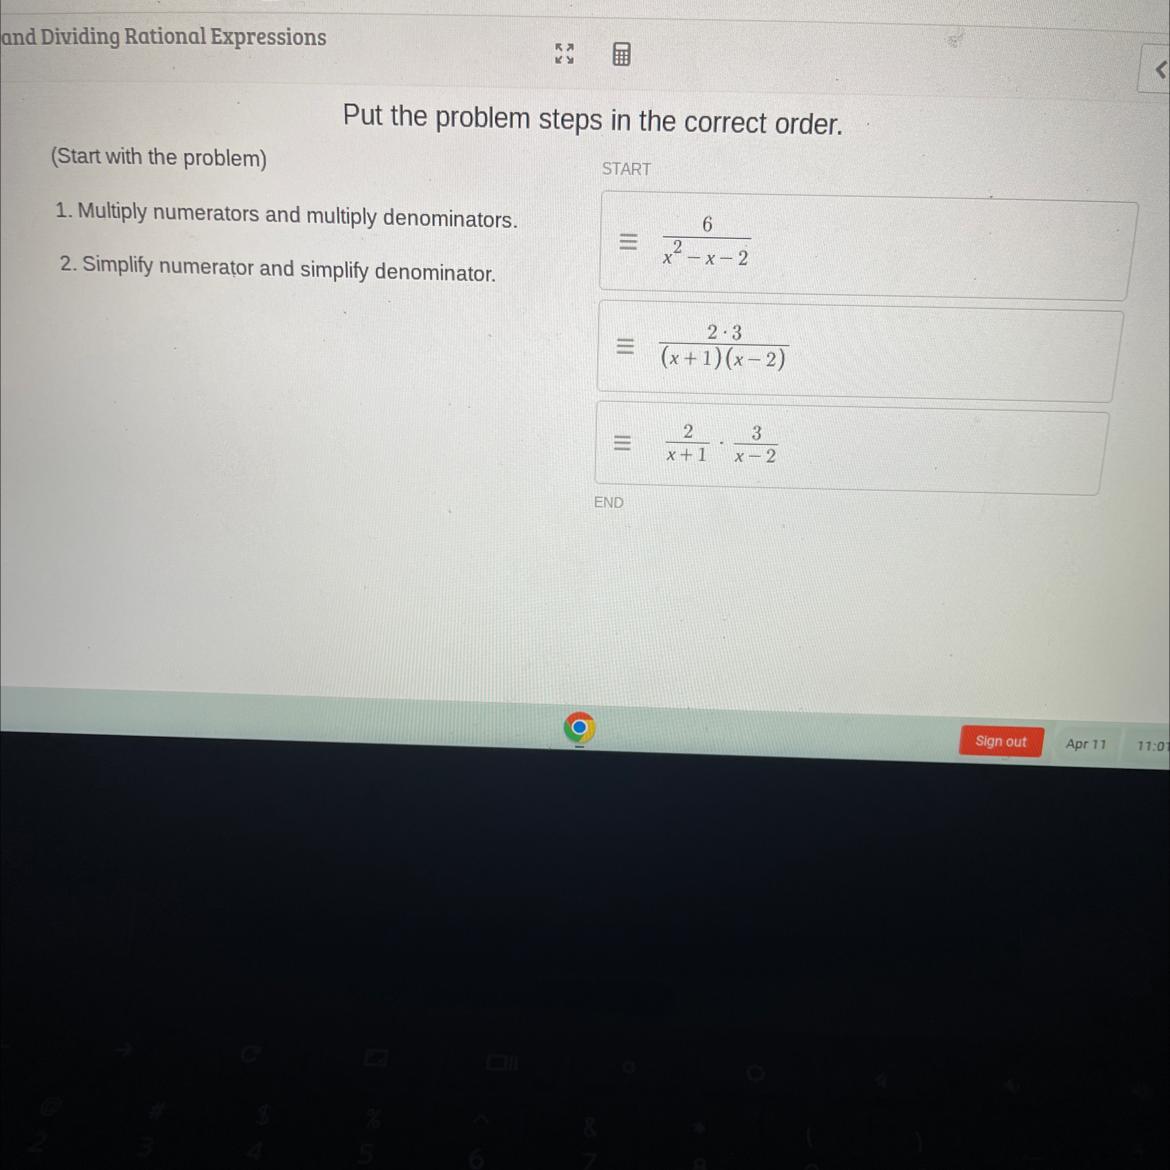 I Need Help With This Question Pls 